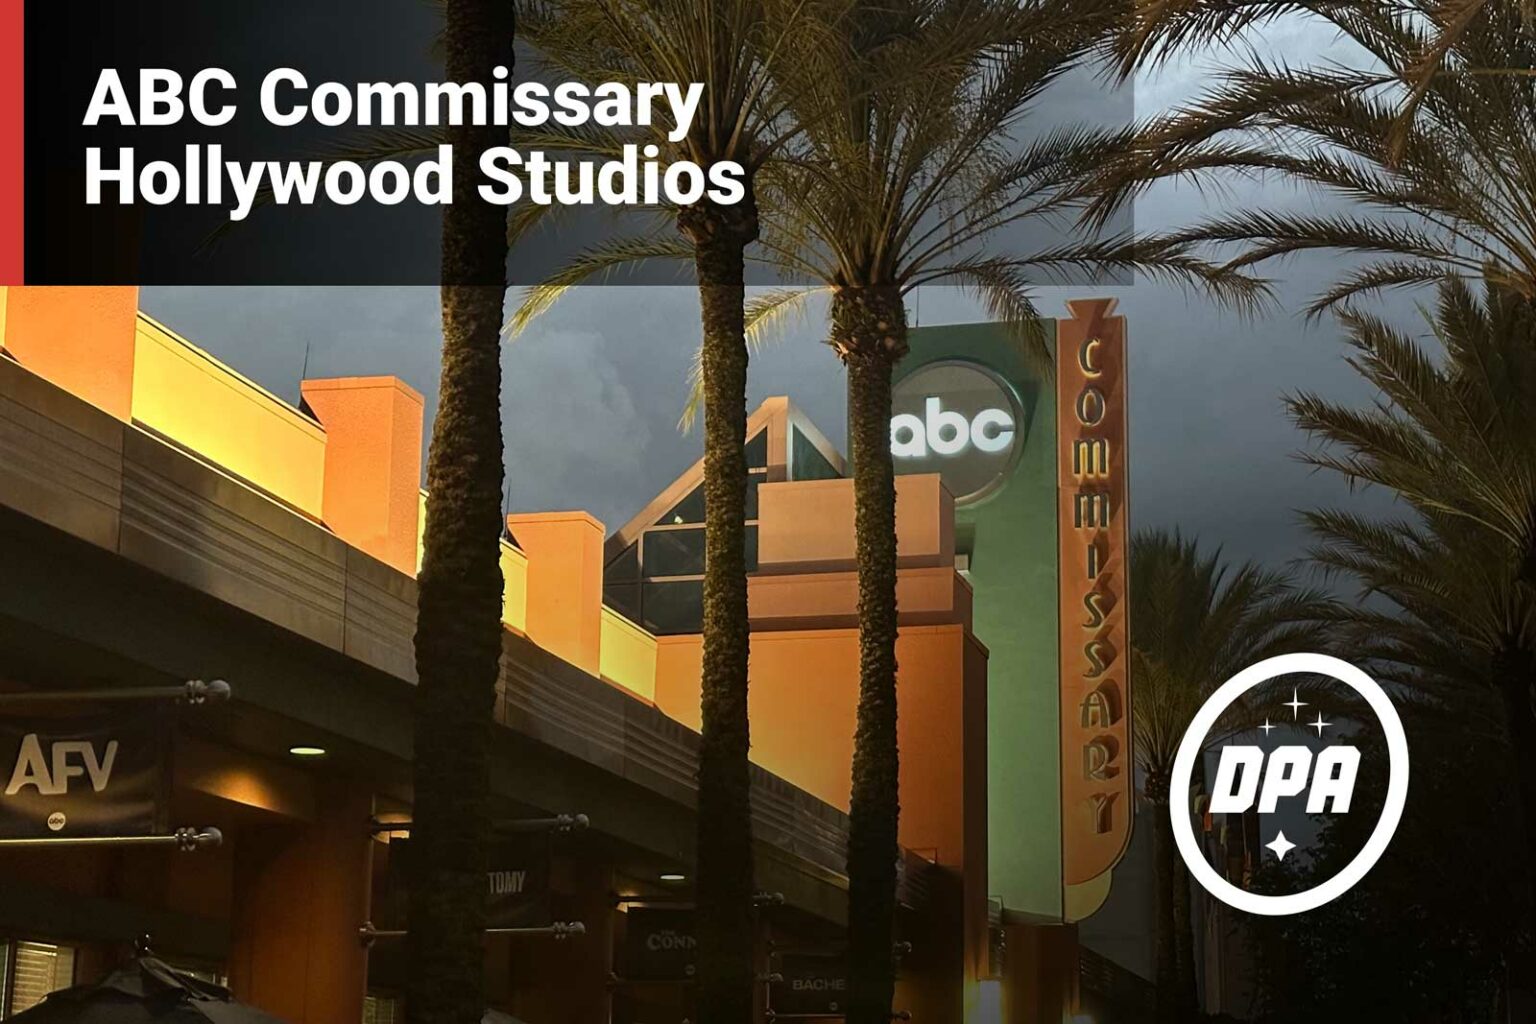 ABC Commissary Quick Service - Hollywood Studios